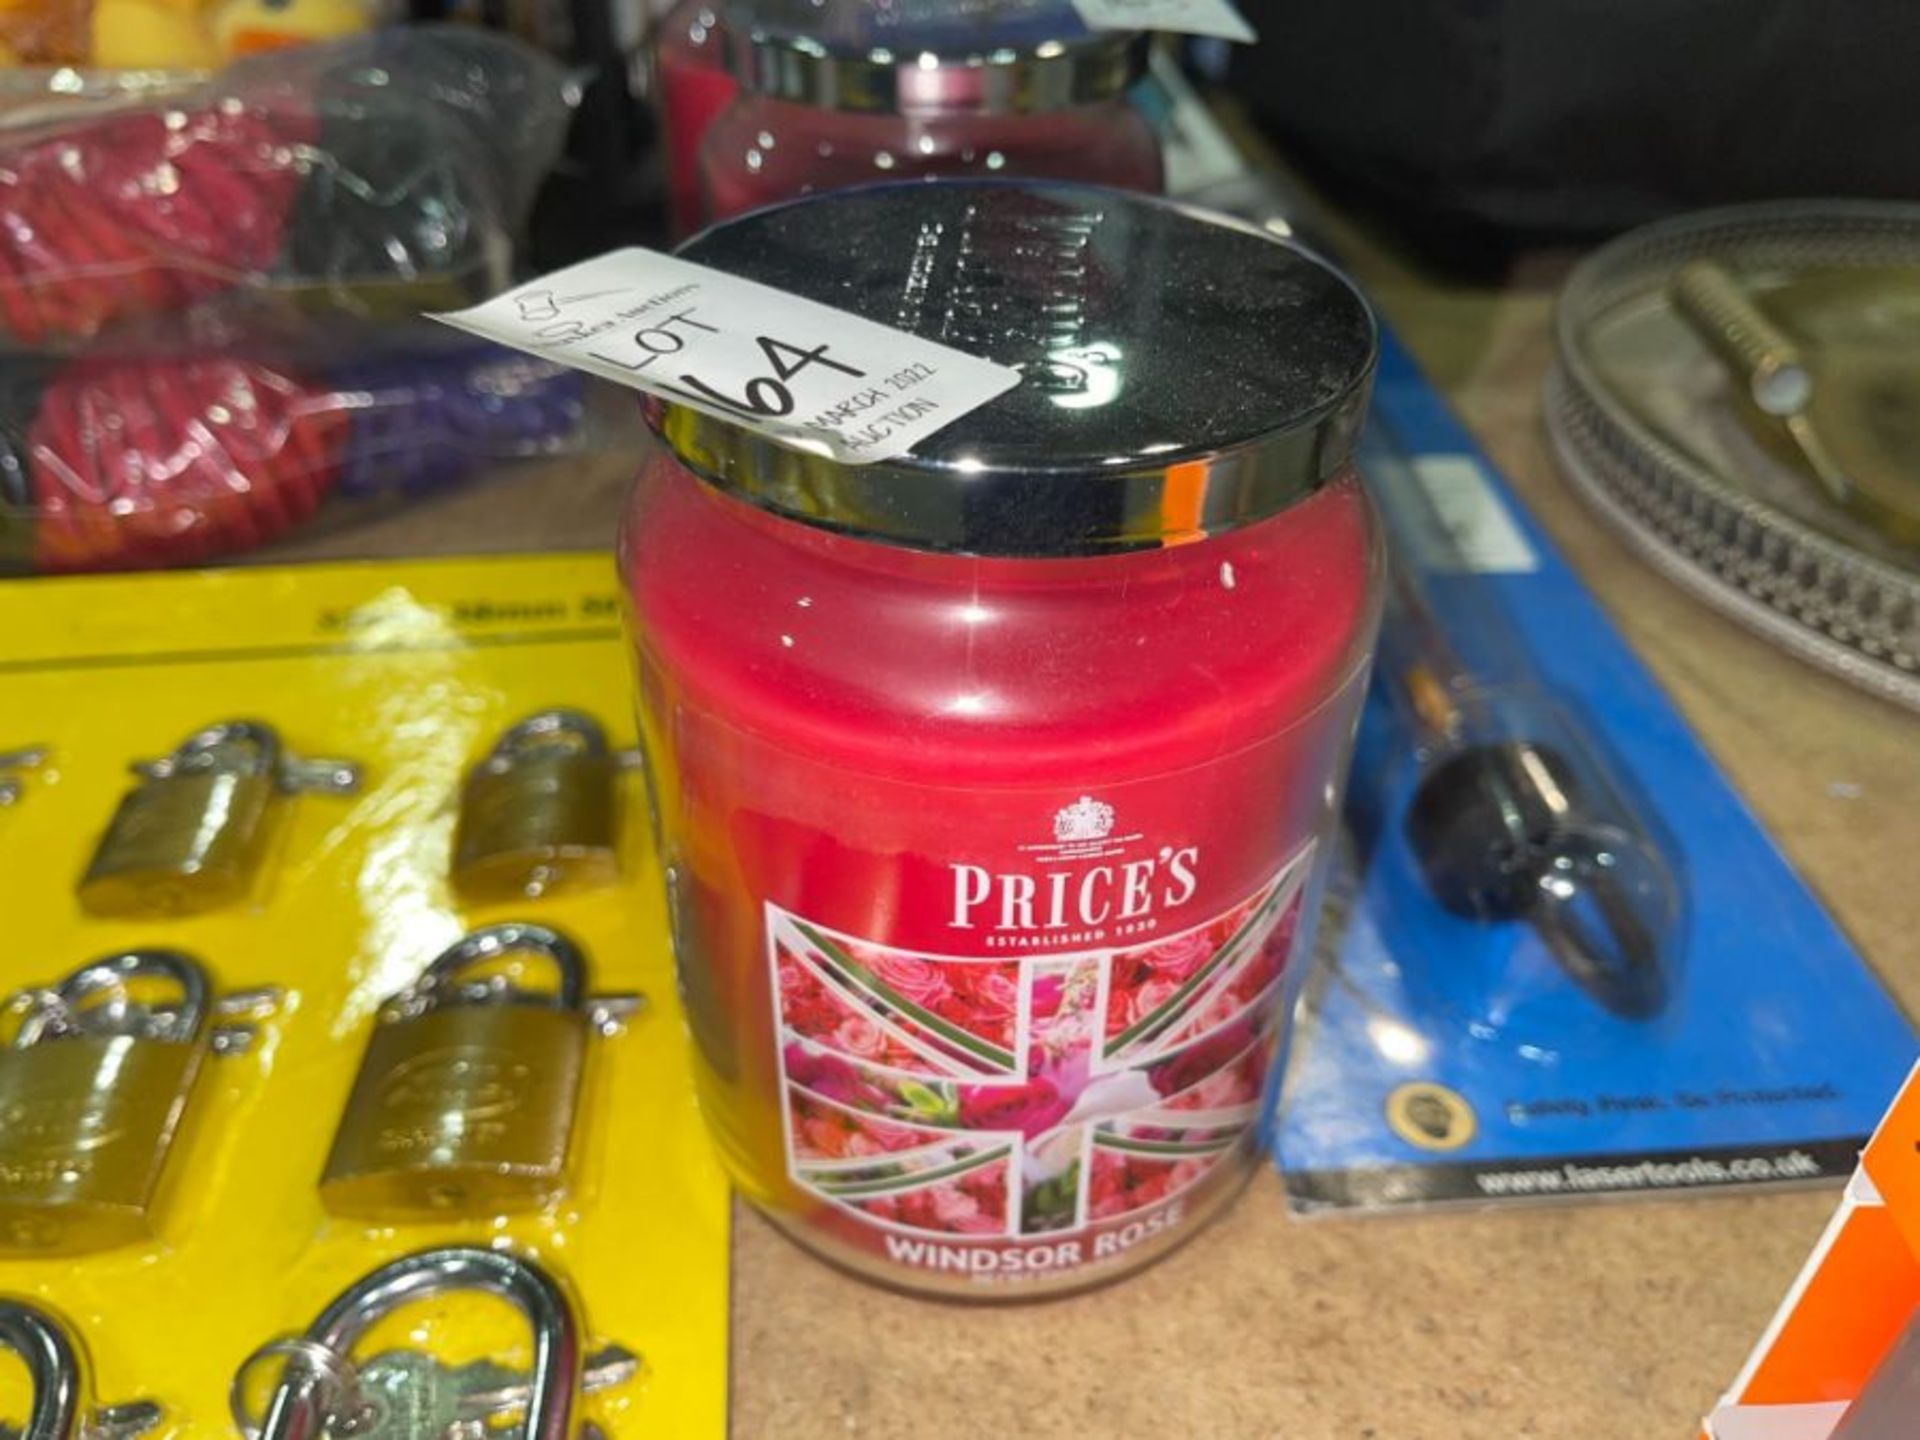 PRICE'S WINDSOR ROSE SCENTED CANDLE